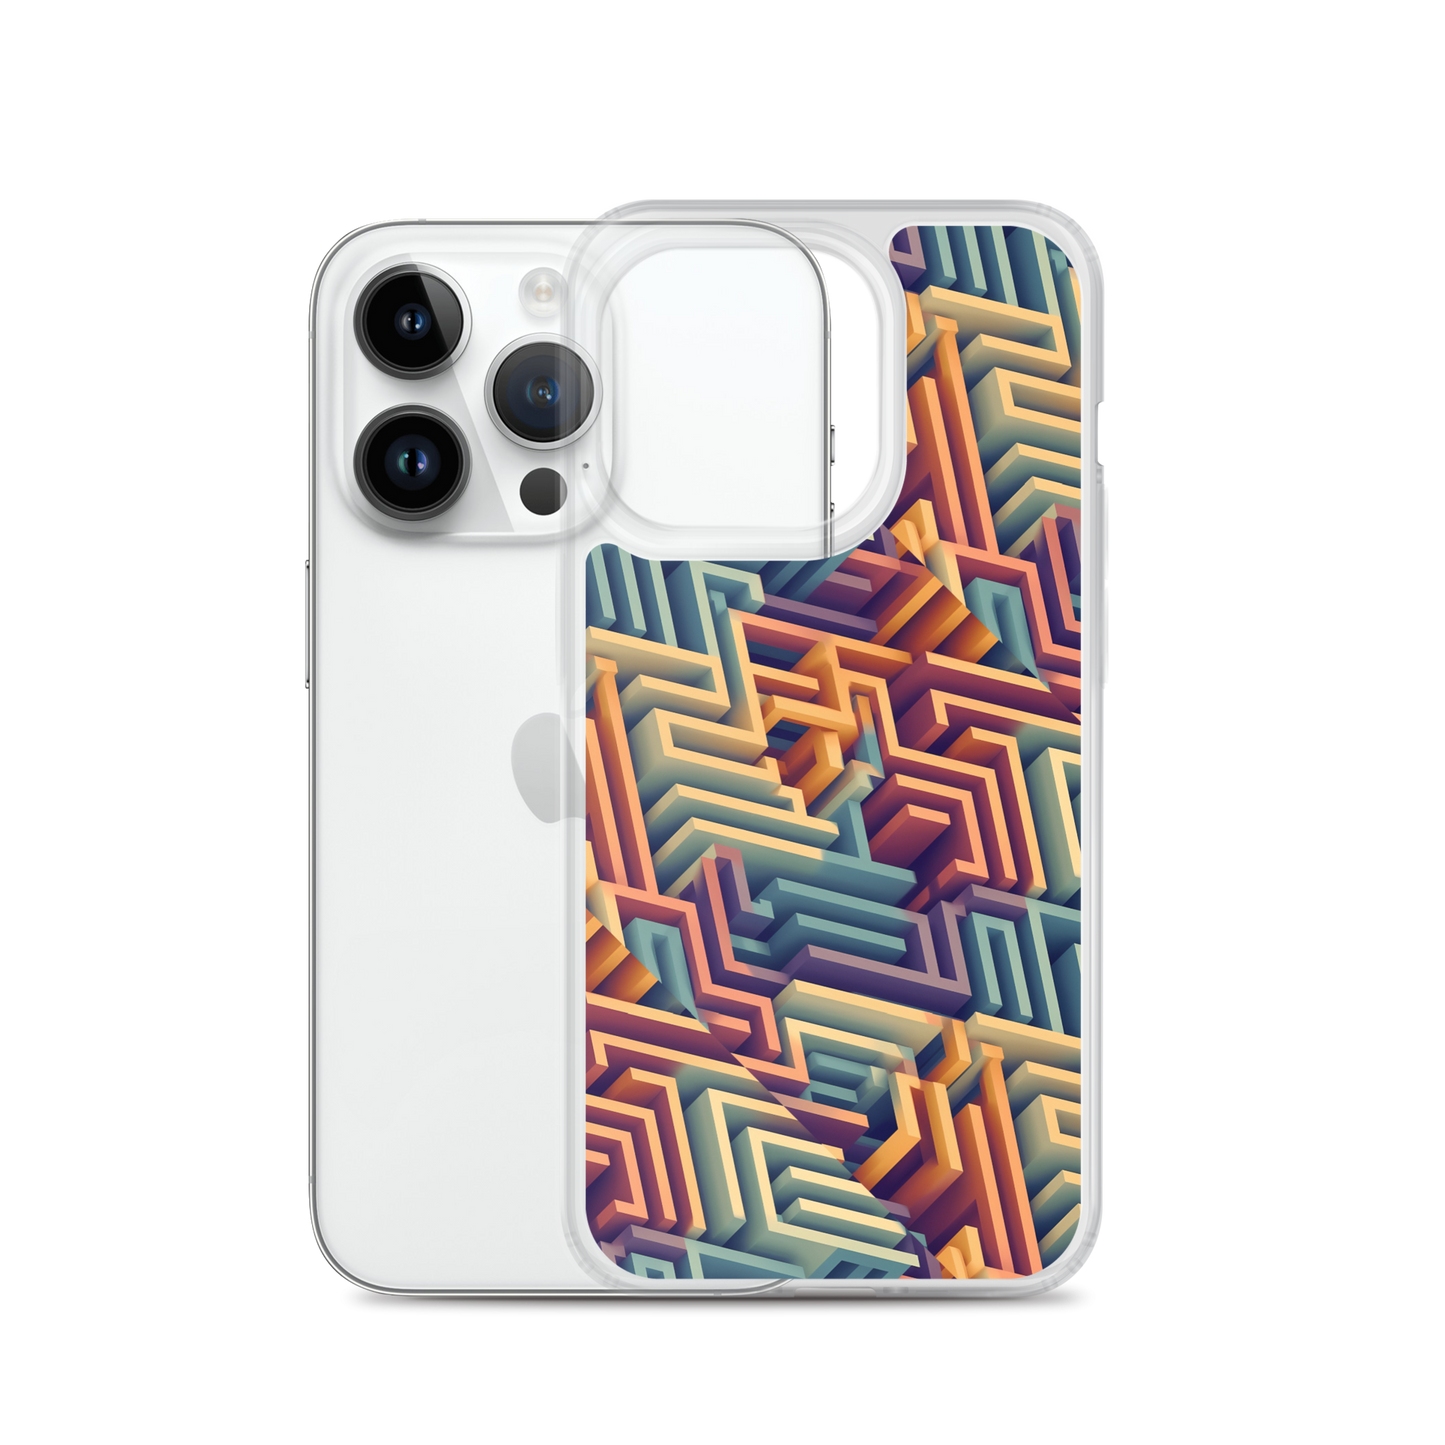 3D Maze Illusion | 3D Patterns | Clear Case for iPhone - #4